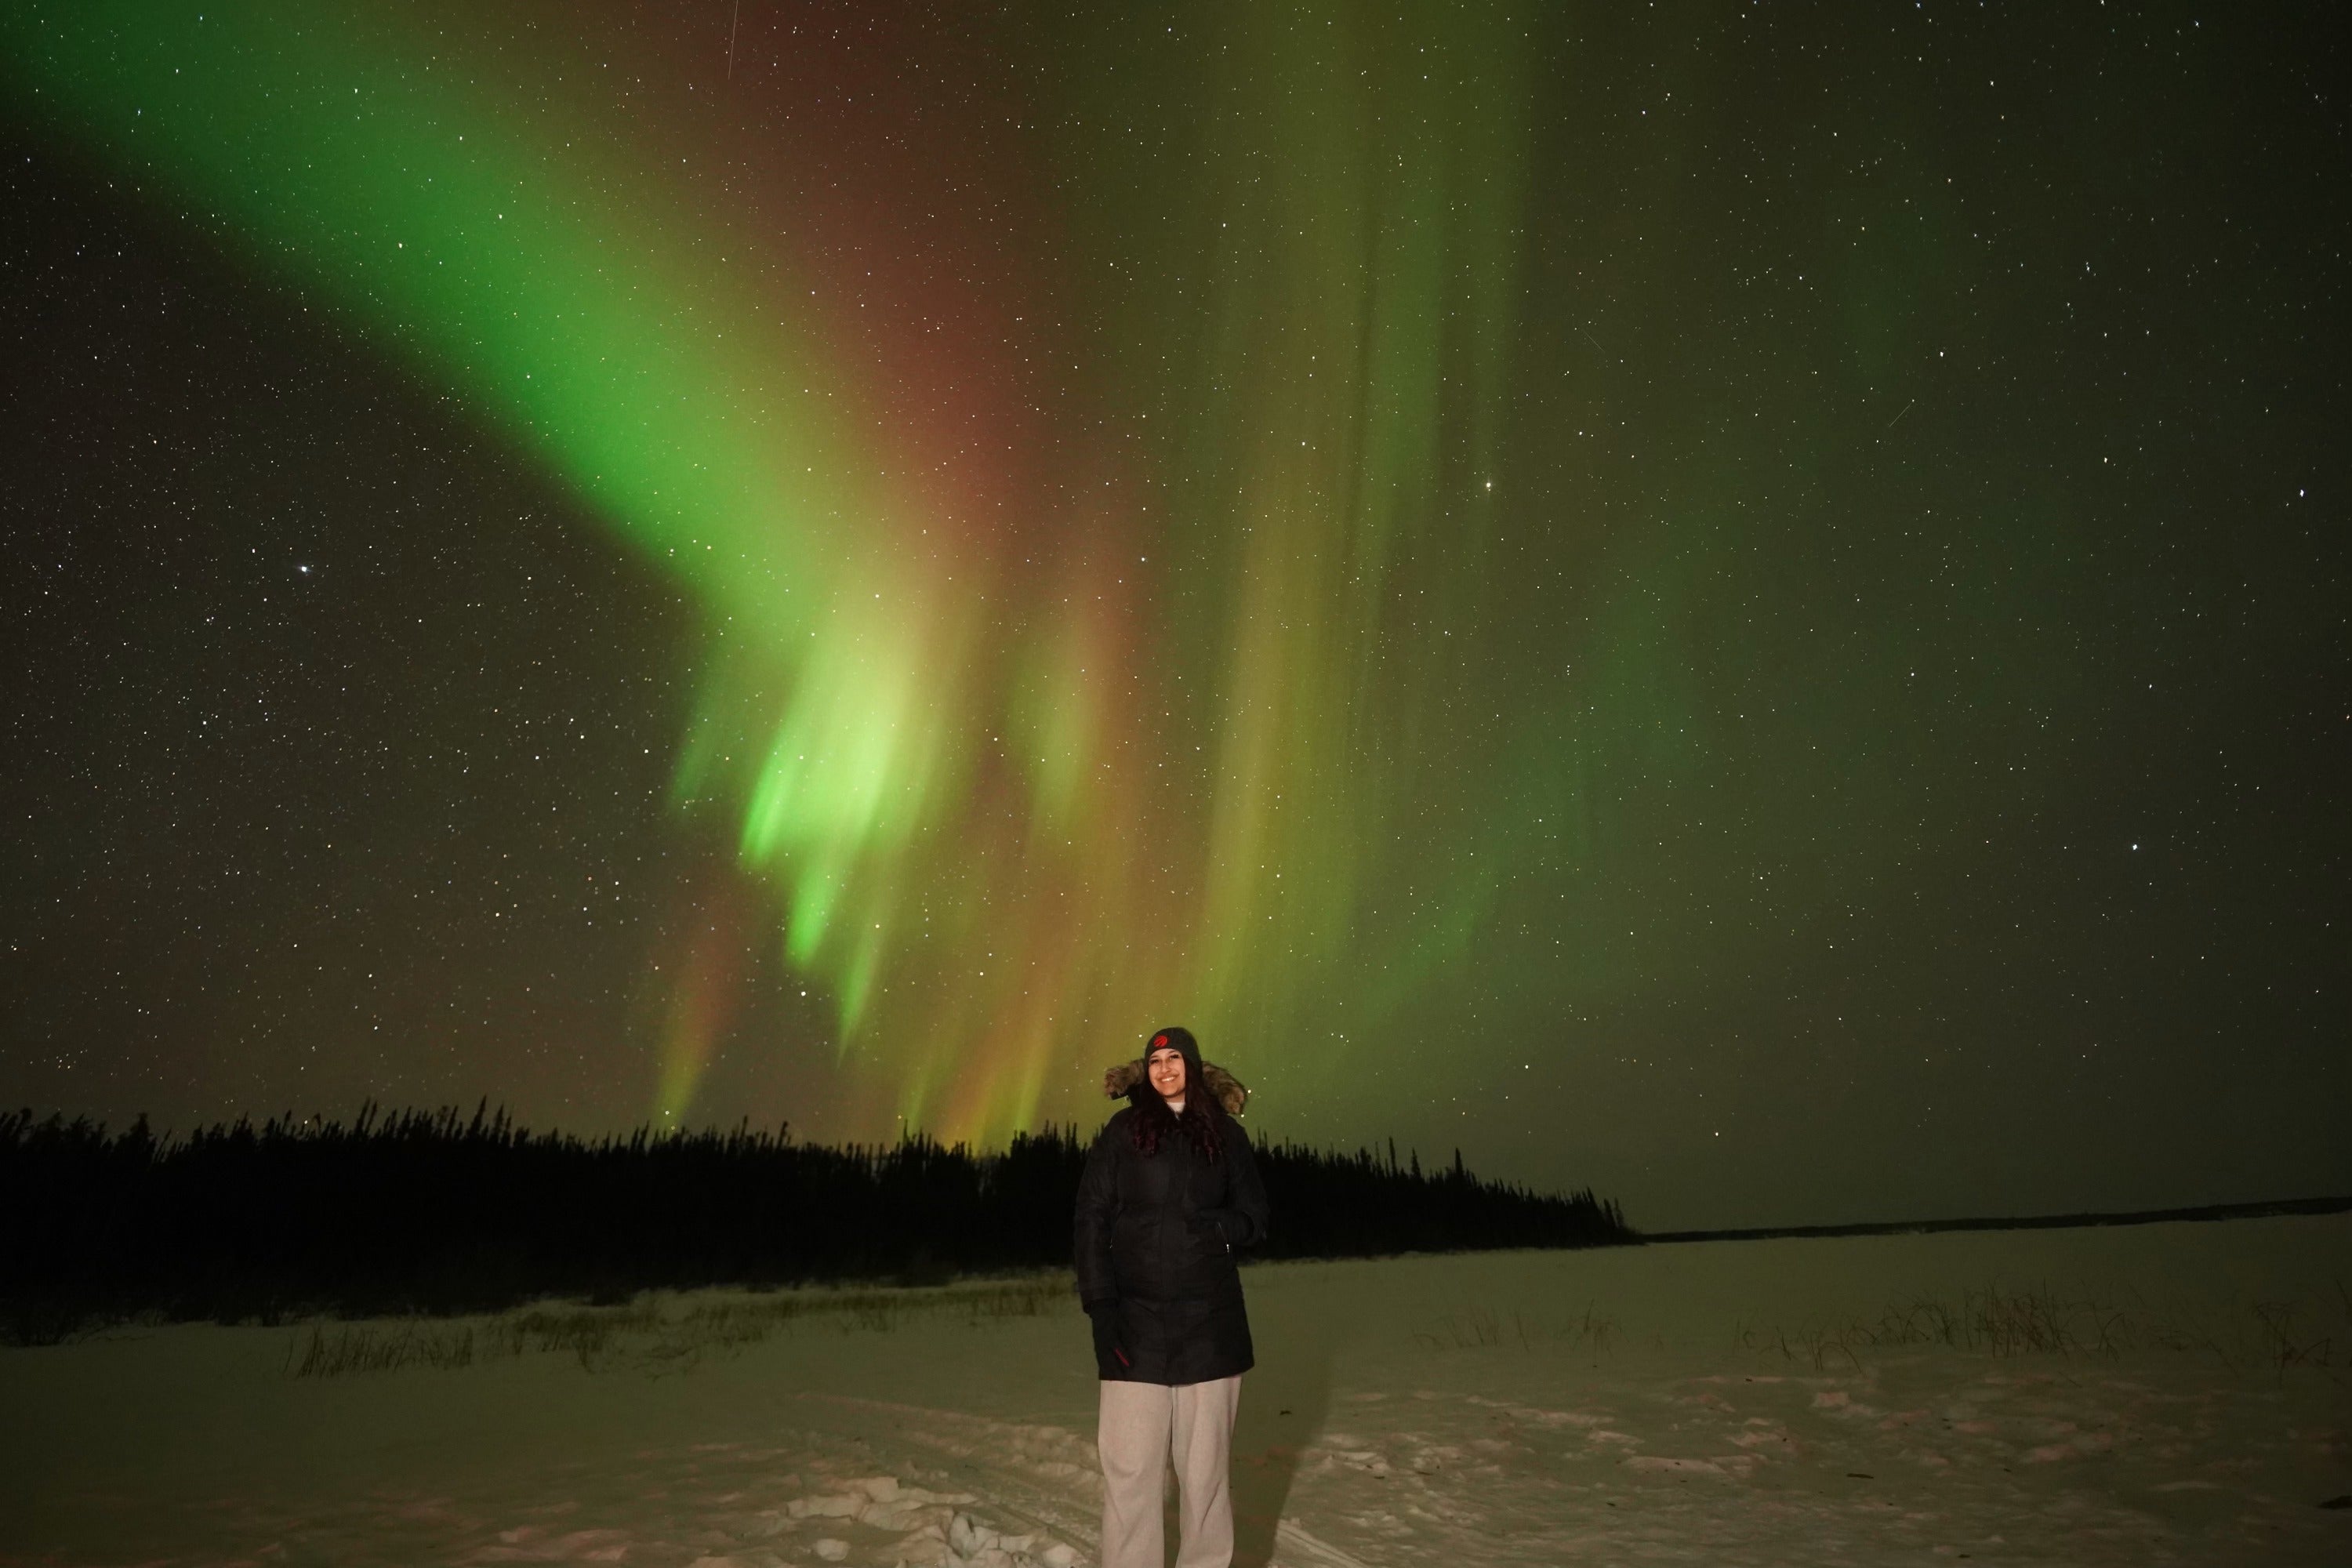 Muskaan posing with the northern lights in the background 